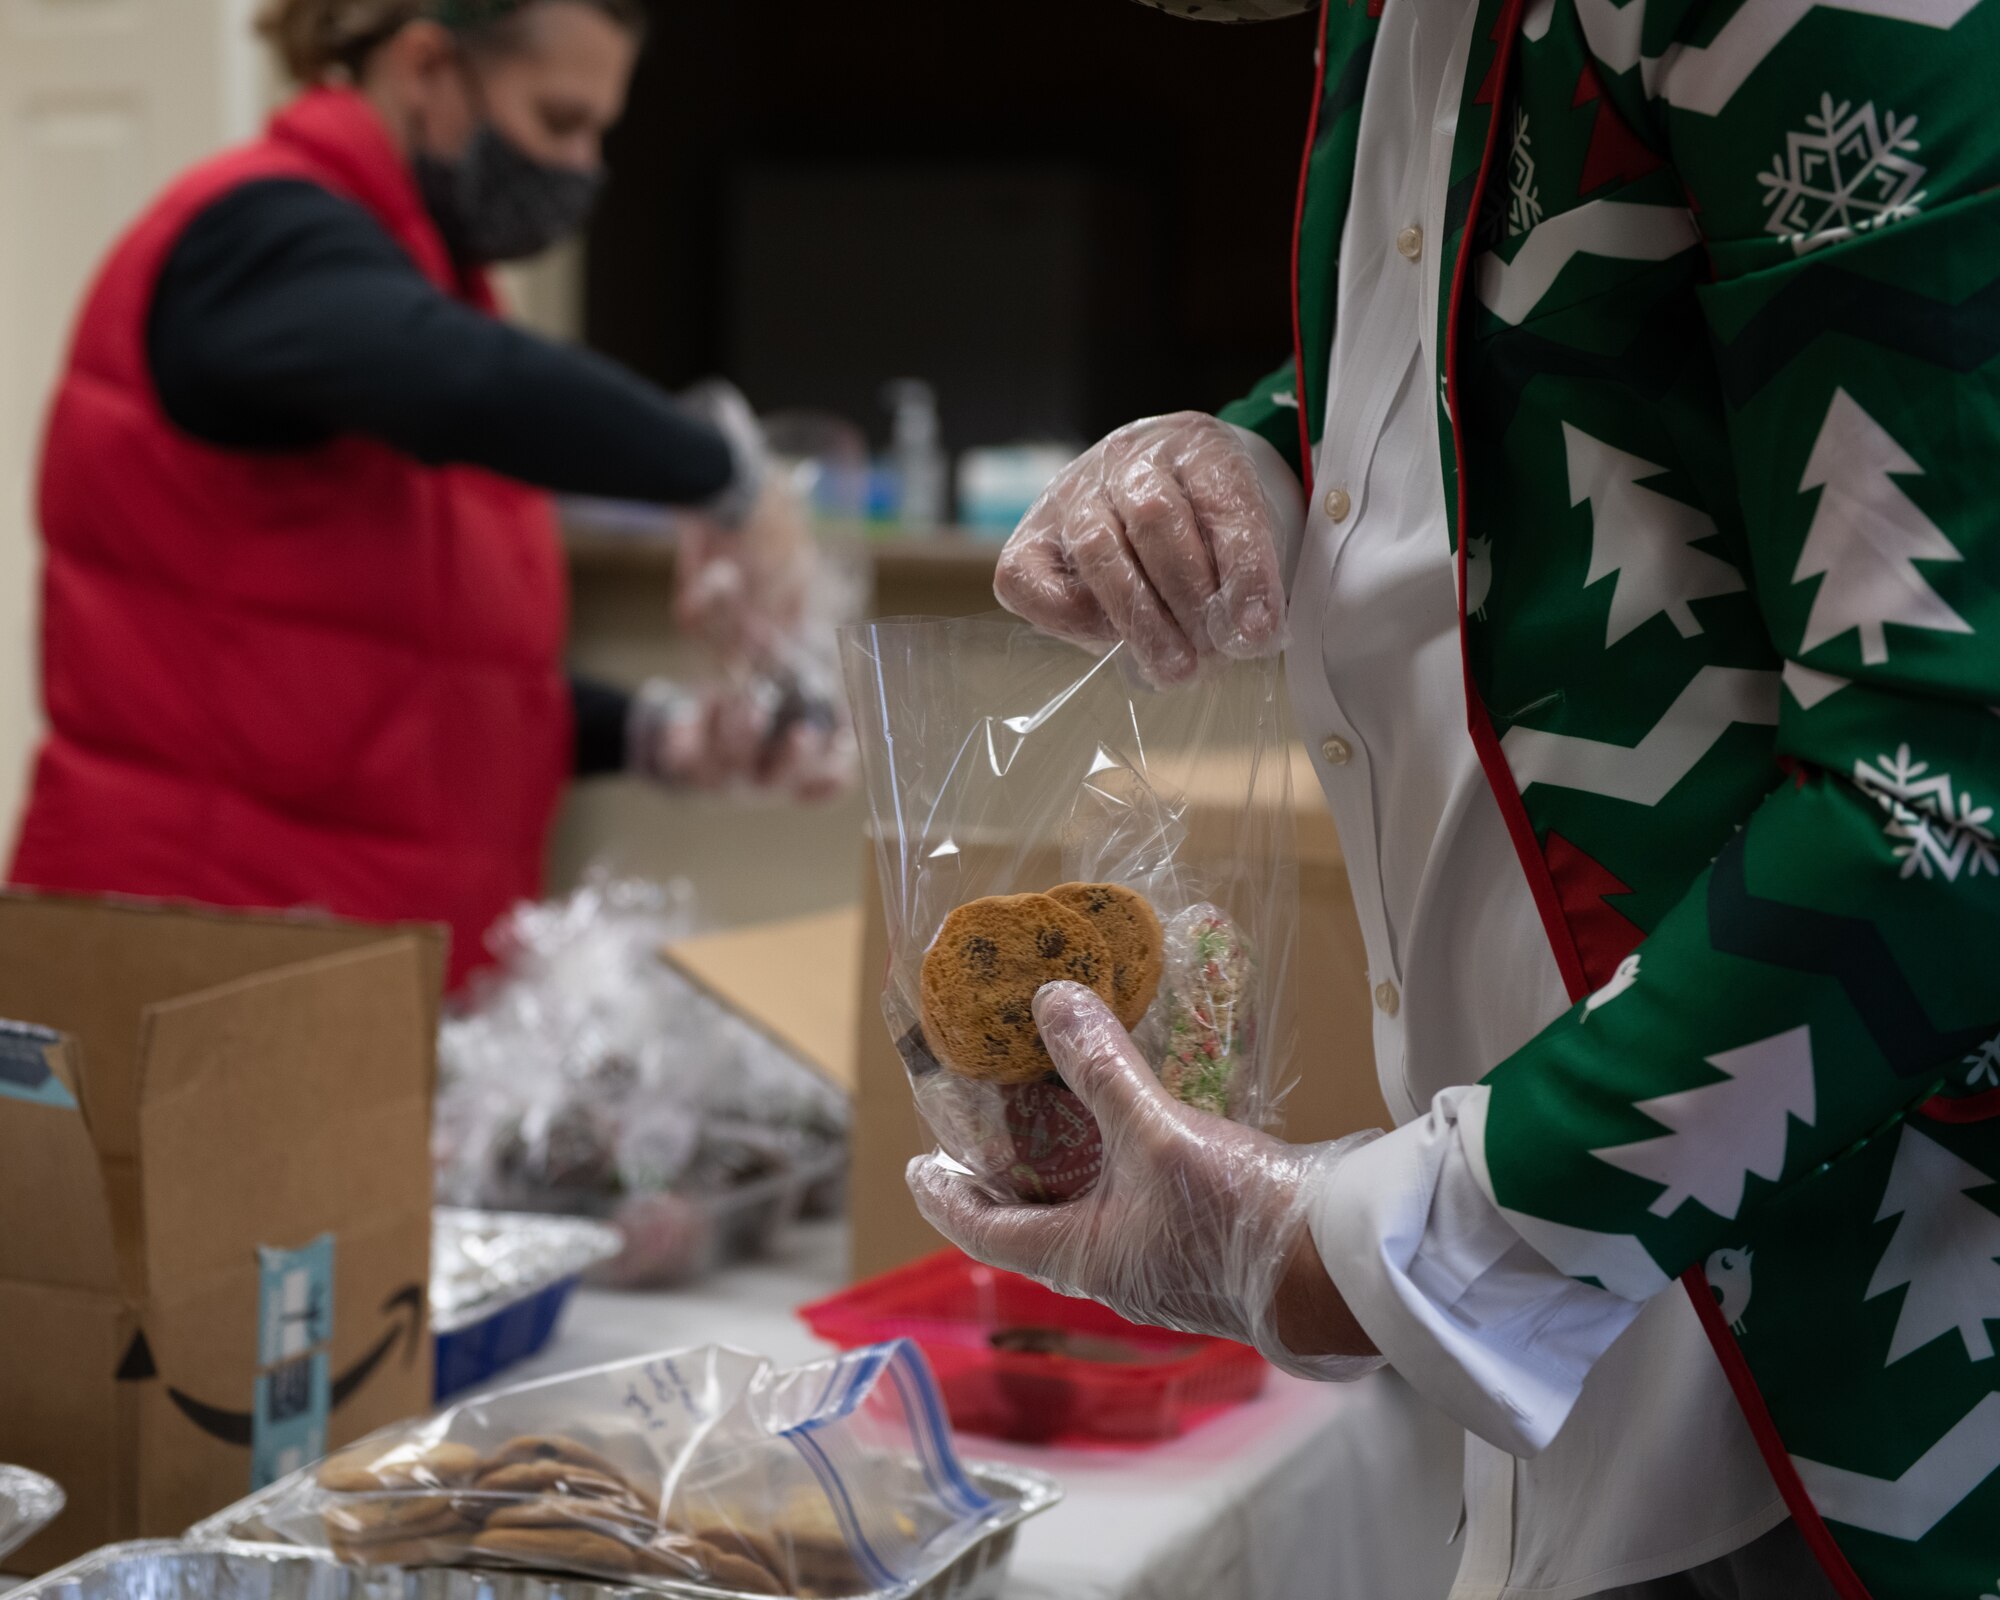 Eddy Mentzer places cookies into bags for Airmen Dec. 16, 2020, at the Hunt Housing Office on Maxwell Air Force Base. Volunteers repackaged donated cookies and other baked goods while wearing masks and gloves to reduce the risk of COVID-19 transmission.